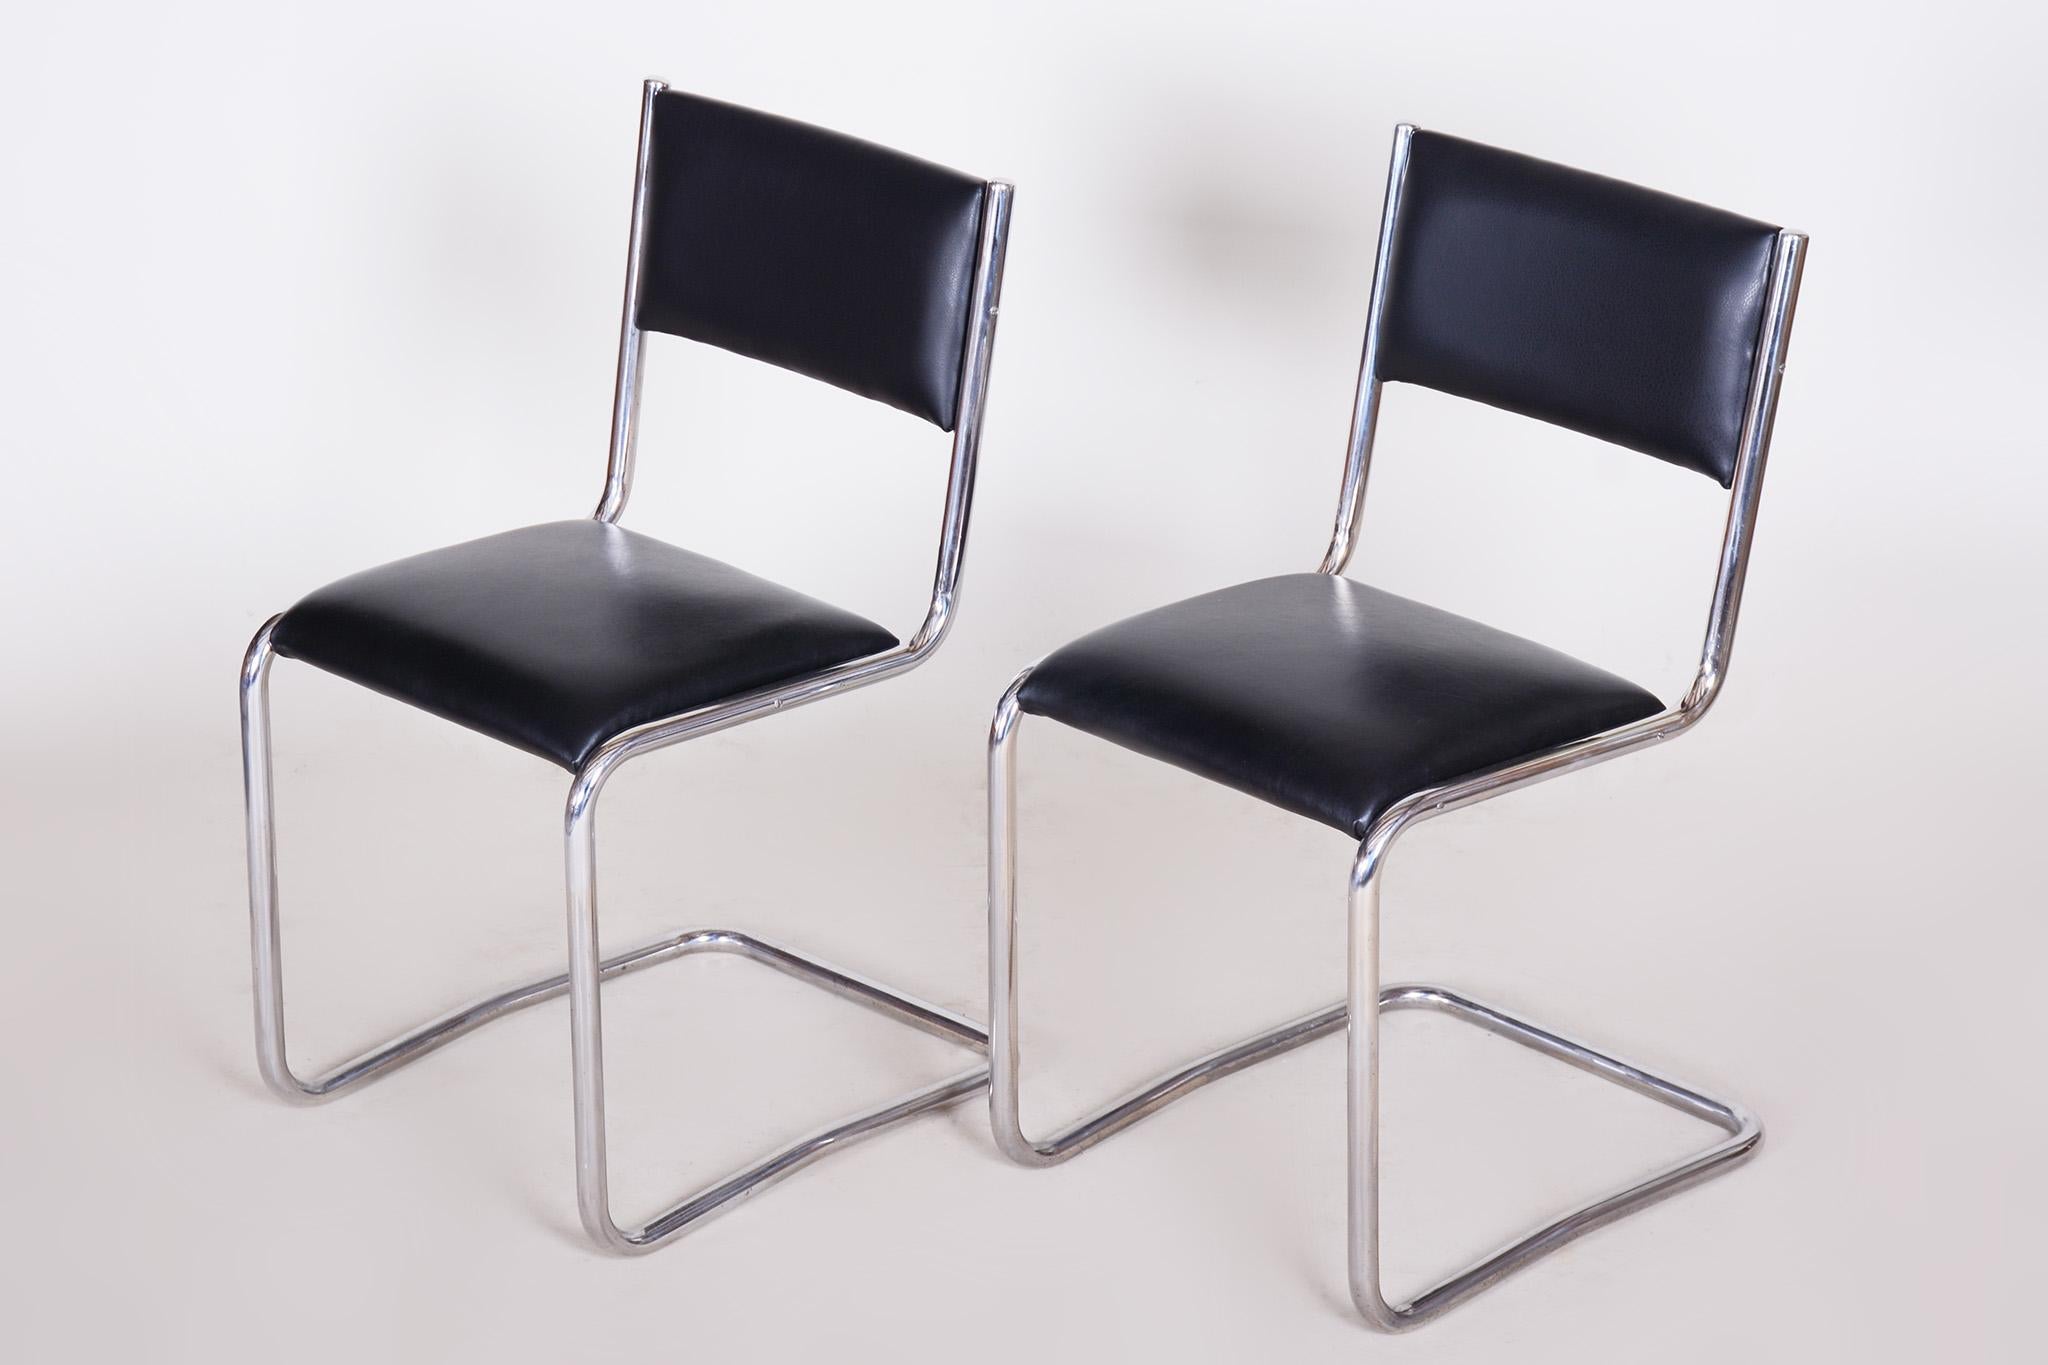 Black Leather Bauhaus Chairs, 1930s Czechia For Sale 9